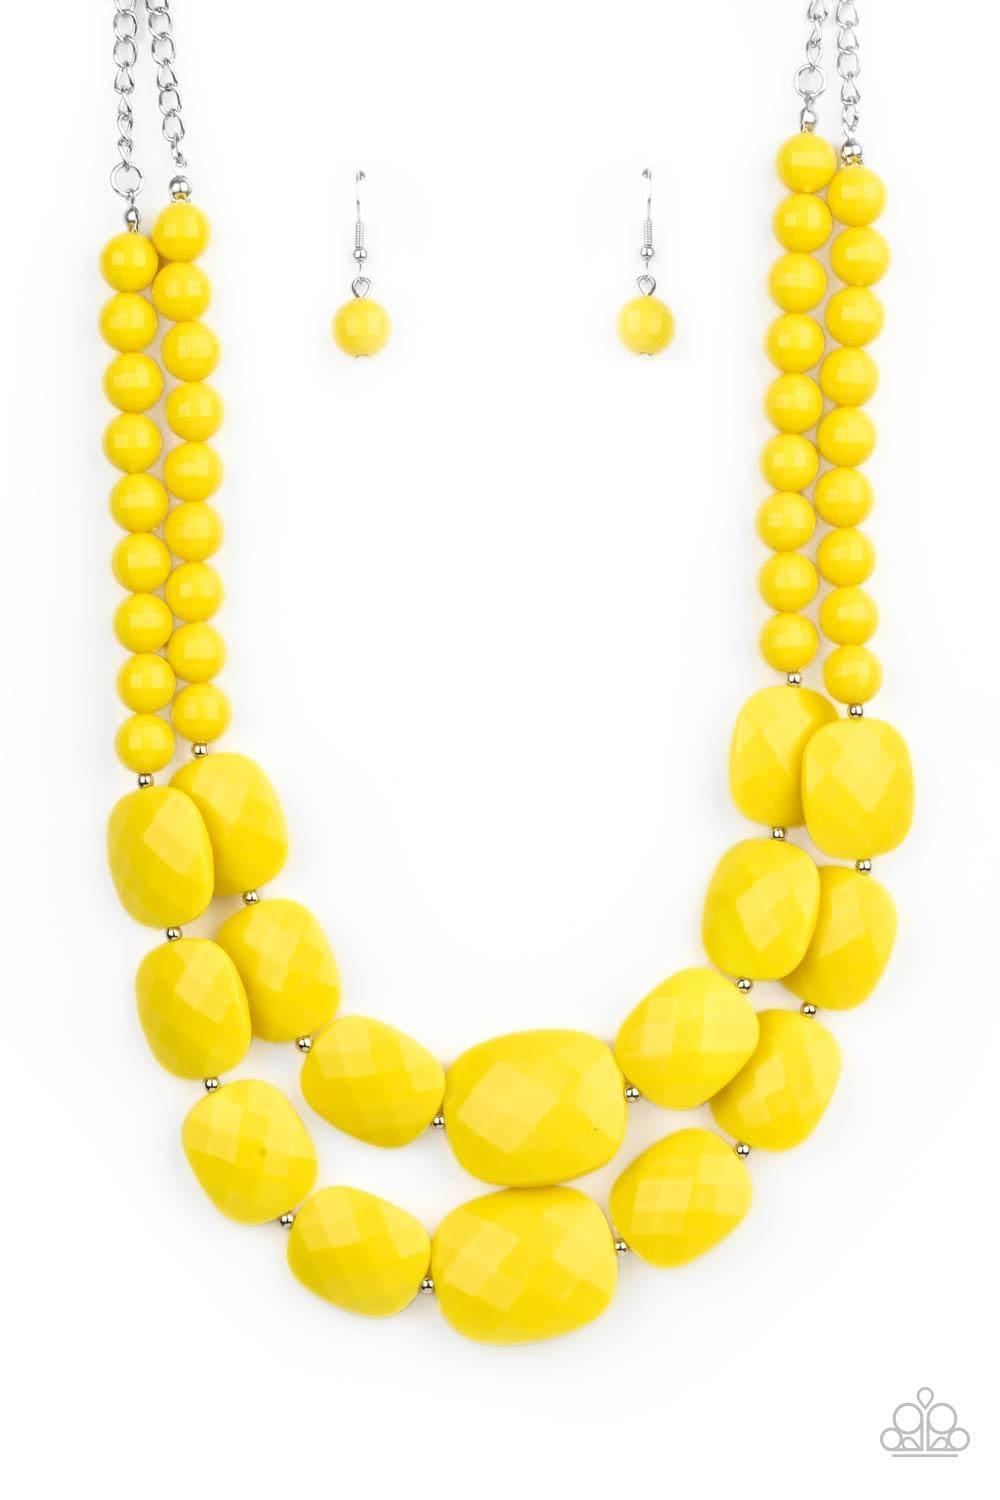 Paparazzi Accessories - Resort Ready - Yellow Necklace - Bling by JessieK